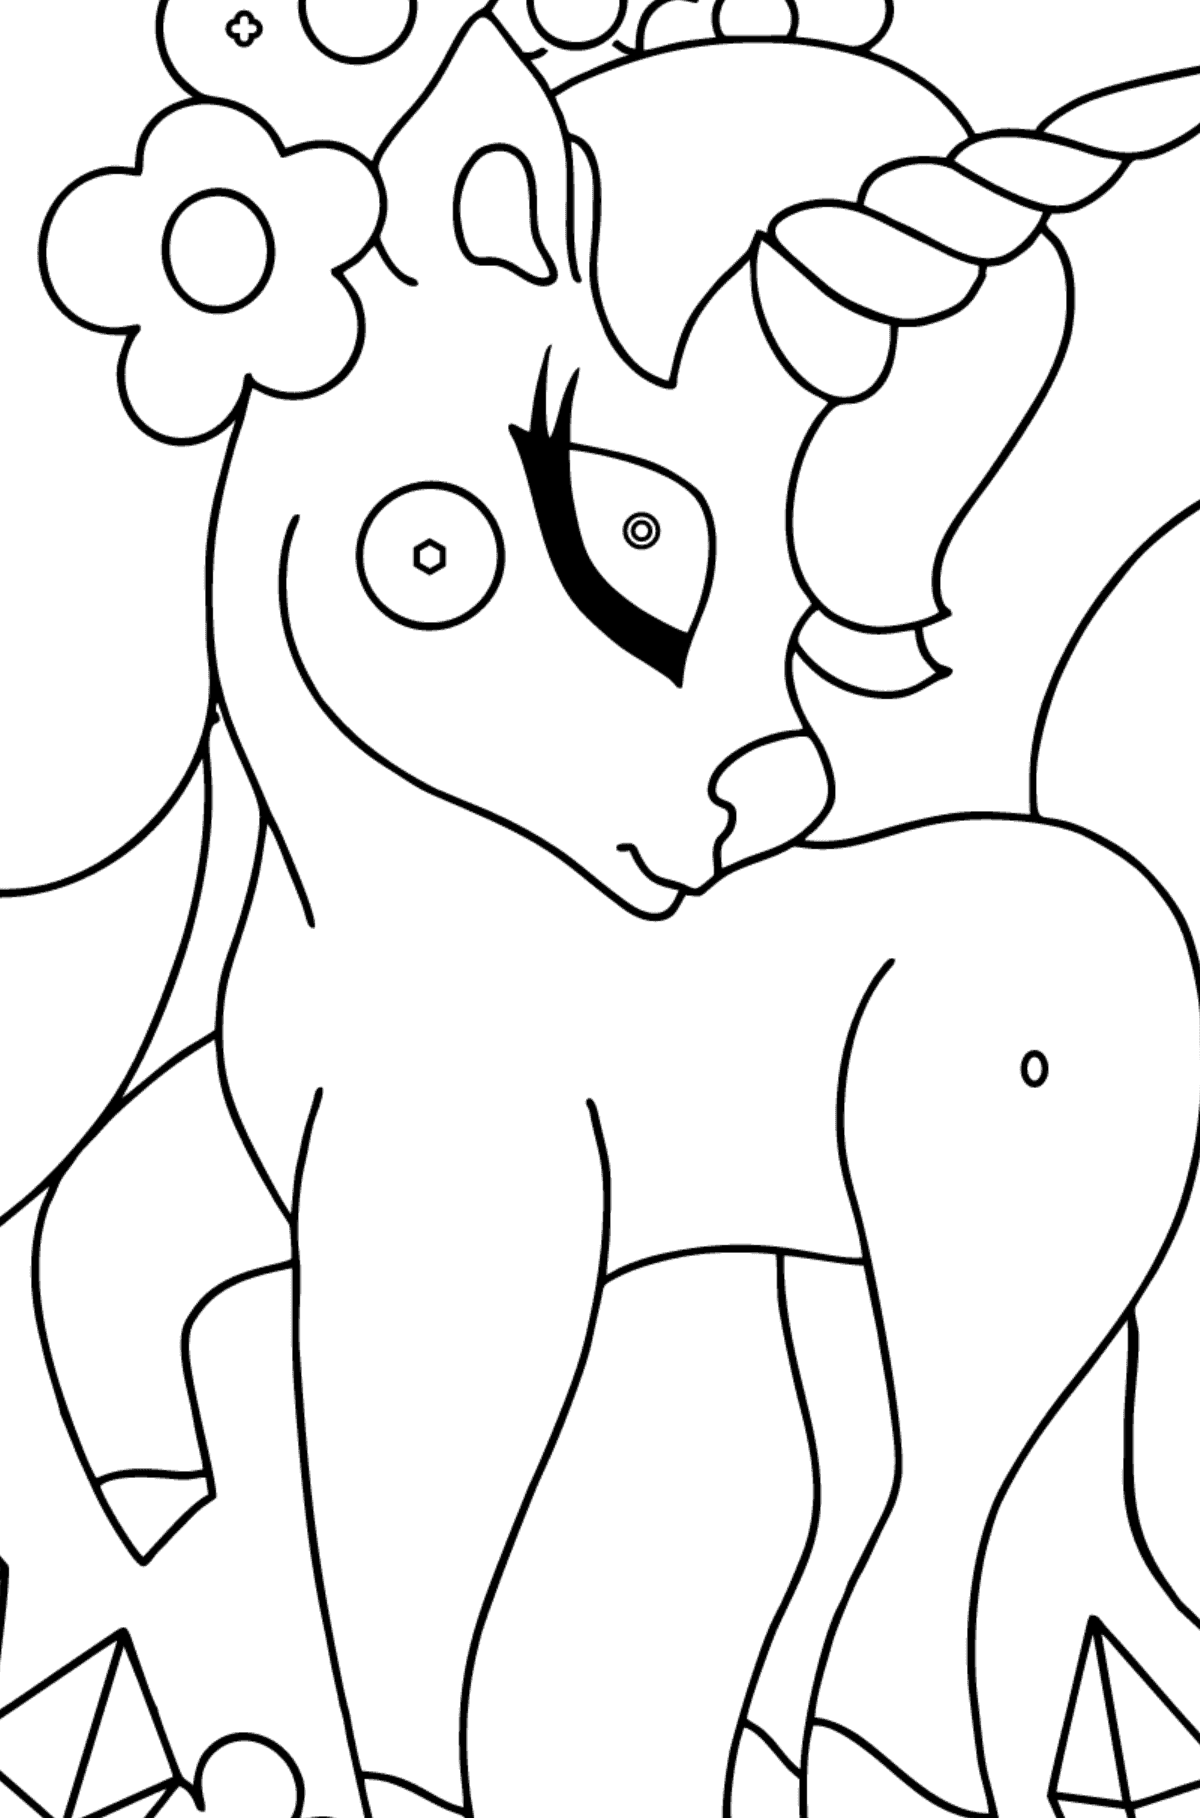 Simple Unicorn Coloring Book for Kids - Coloring by Geometric Shapes for Kids